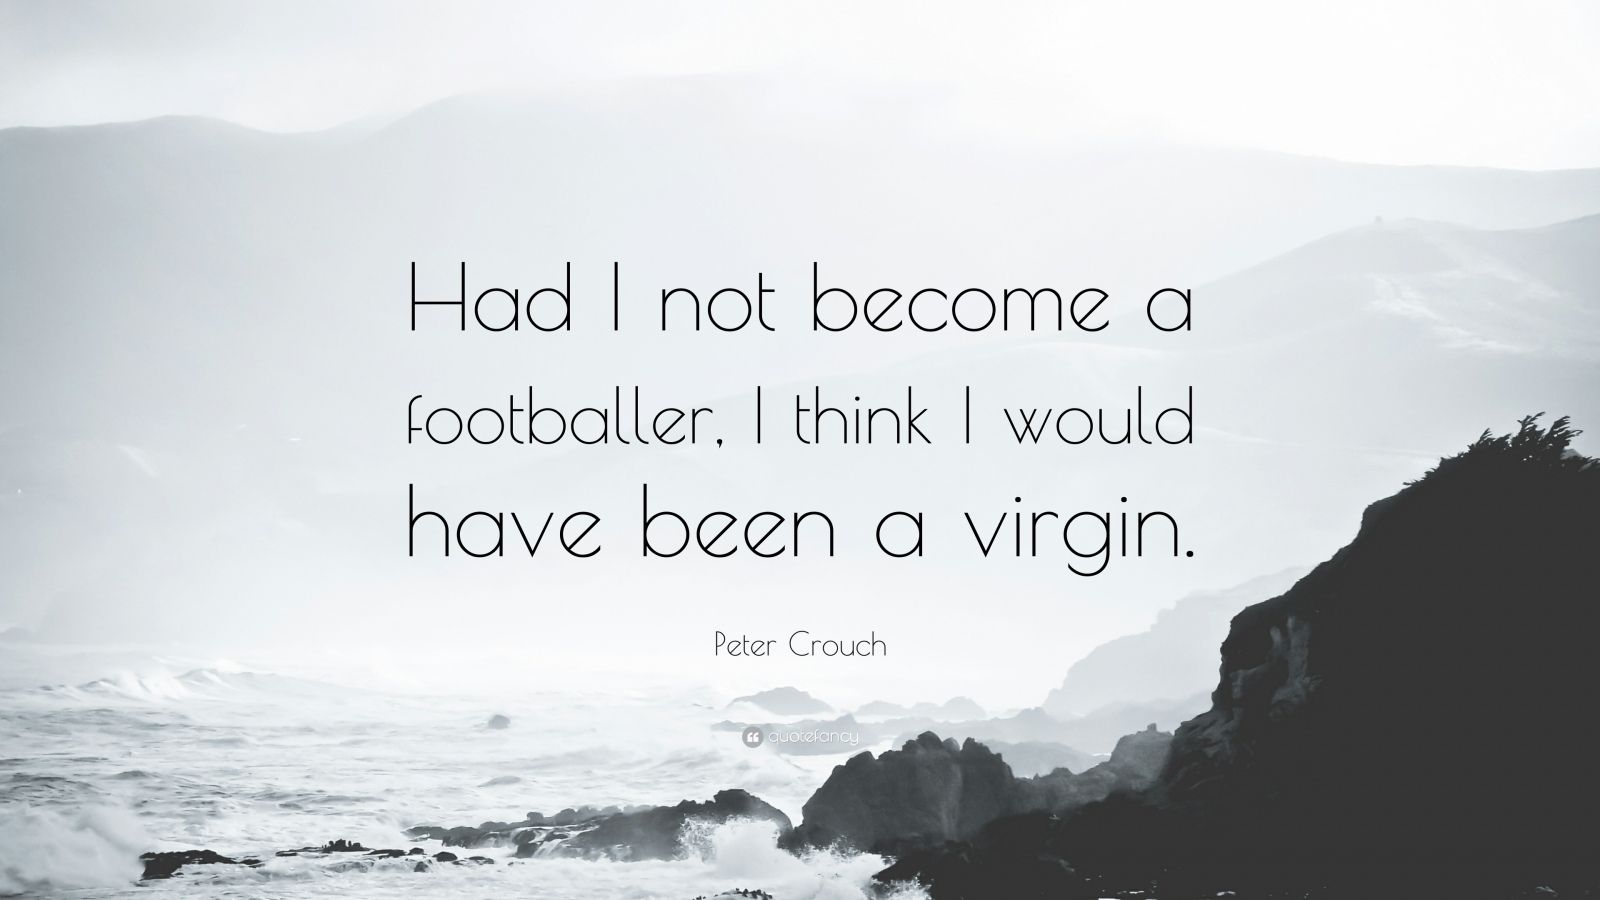 13 of Peter Crouch's best quotes: Weight, height, fashion, FIFA corruption  - Planet Football